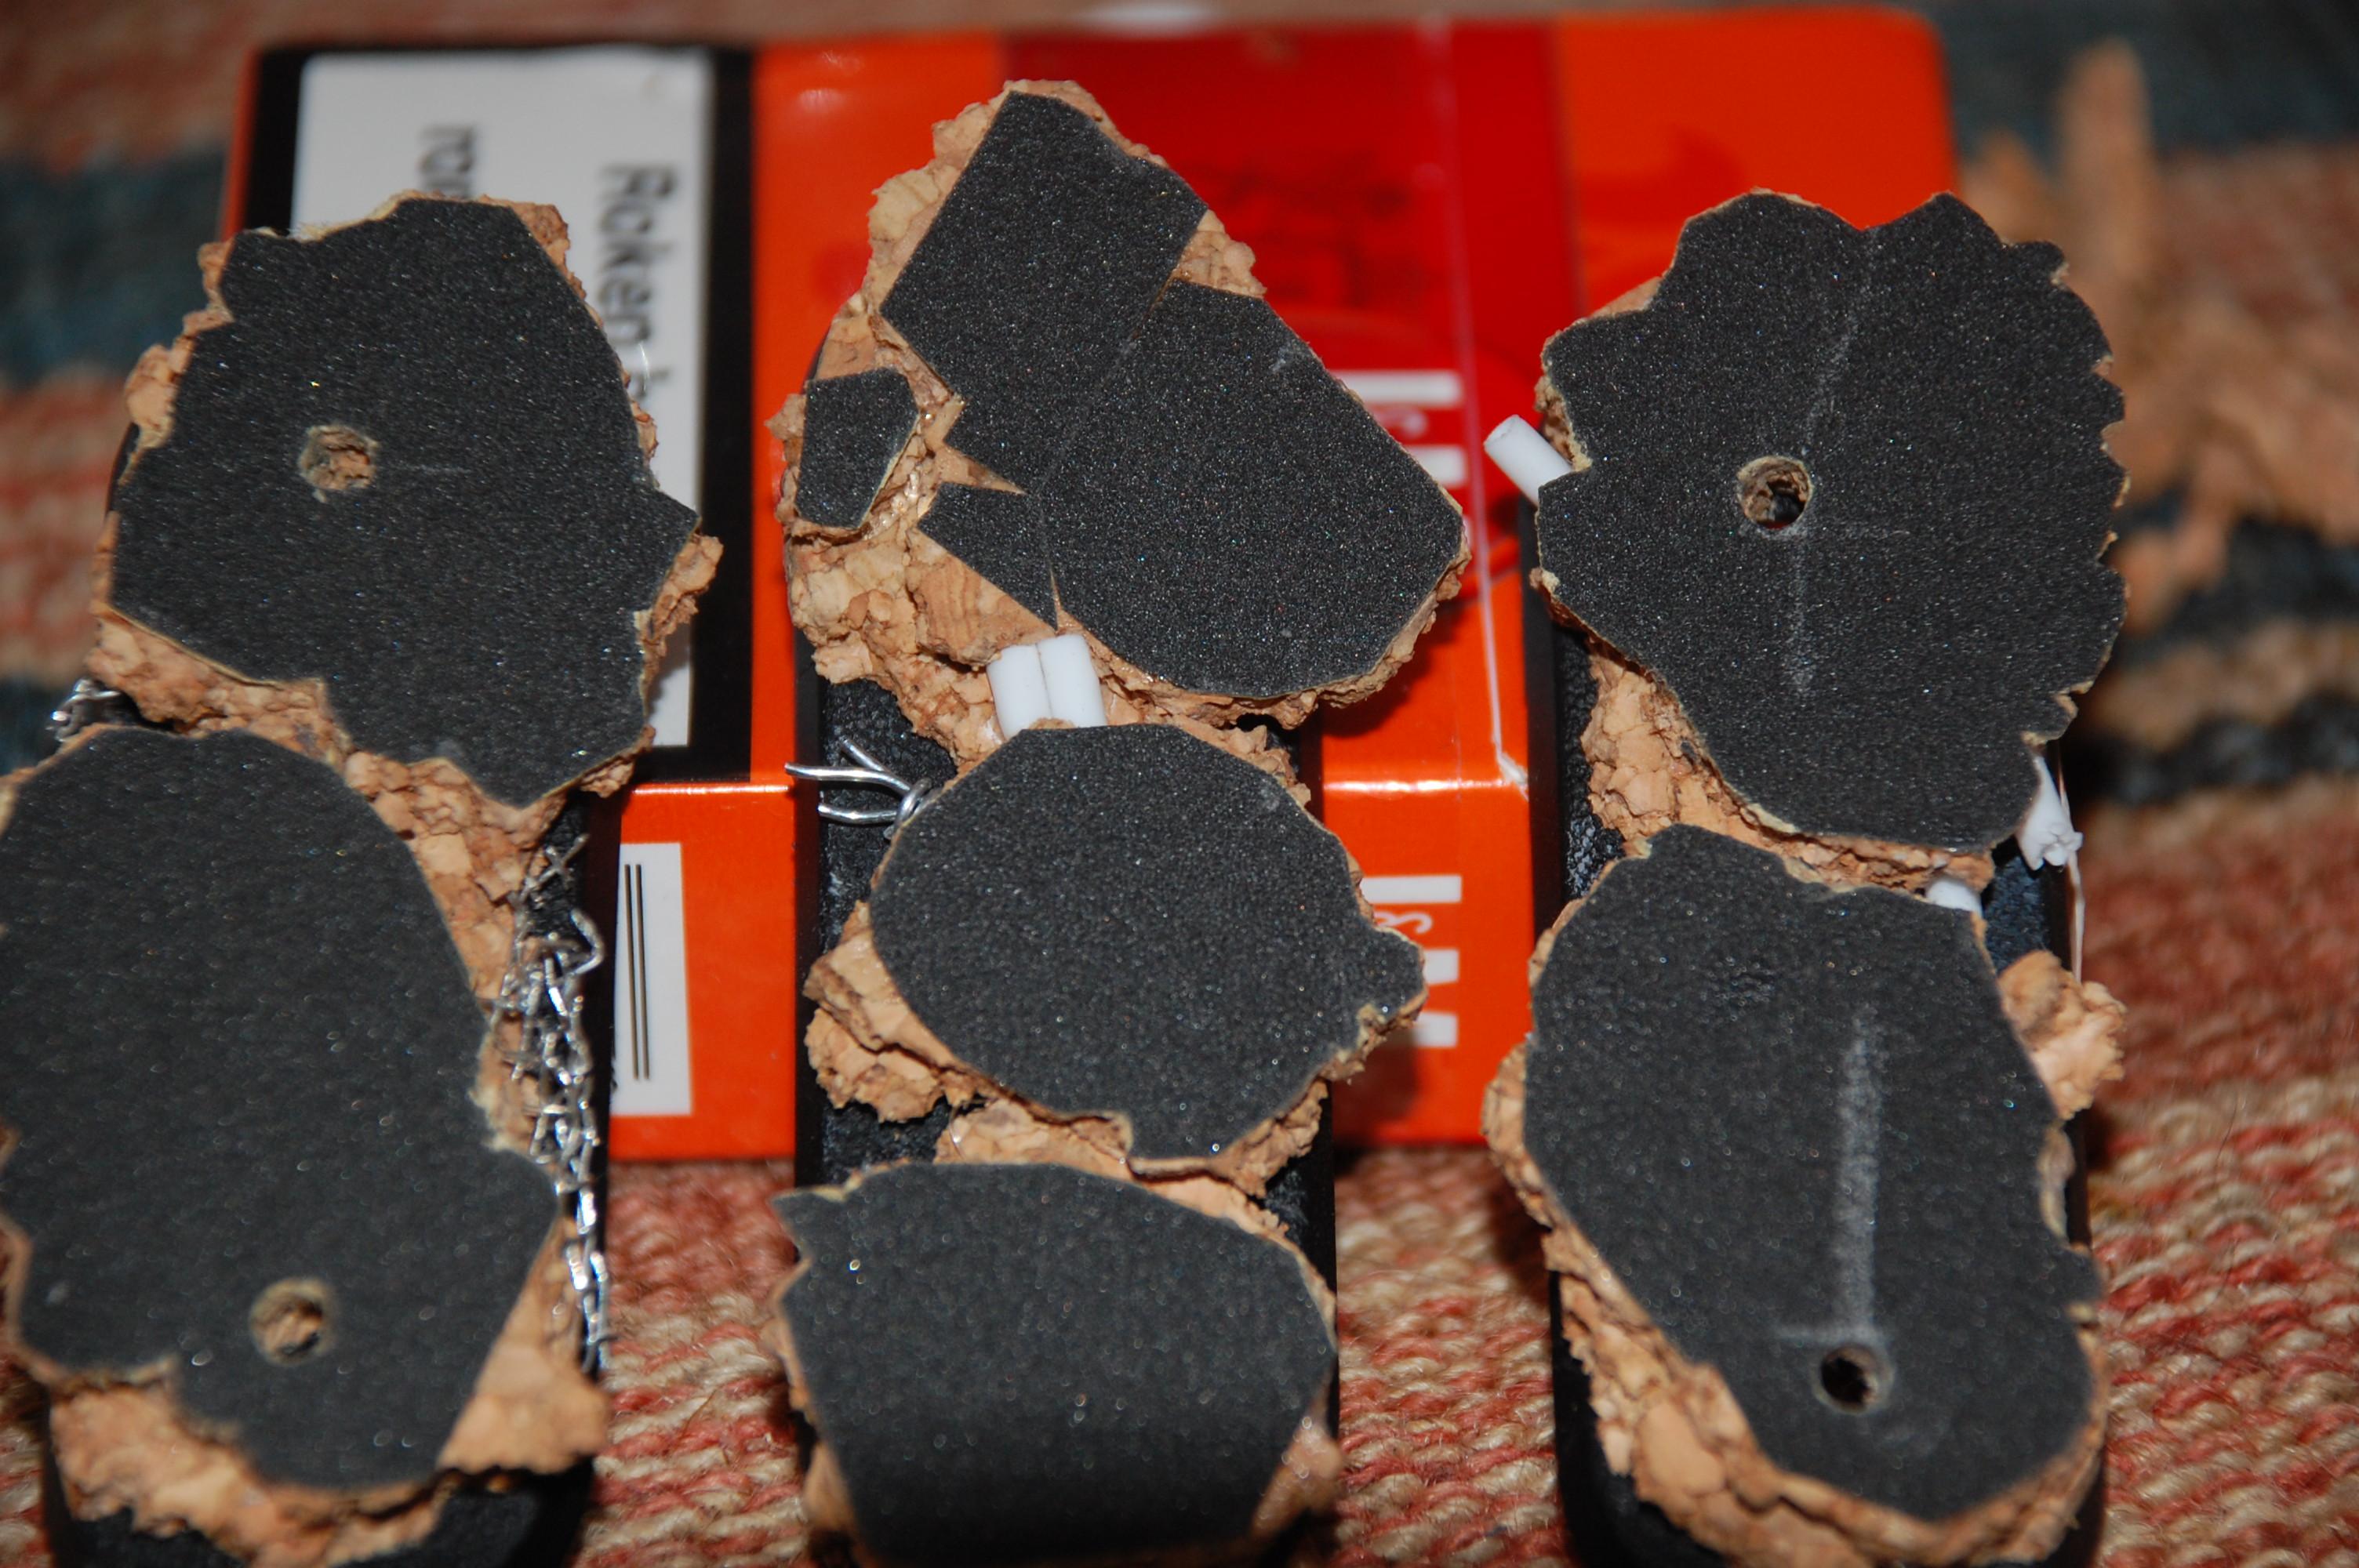 These are bases for my DV Ravenwing bikers wanted a asphalt/roadie looking base just cork and medium grit sanding paper